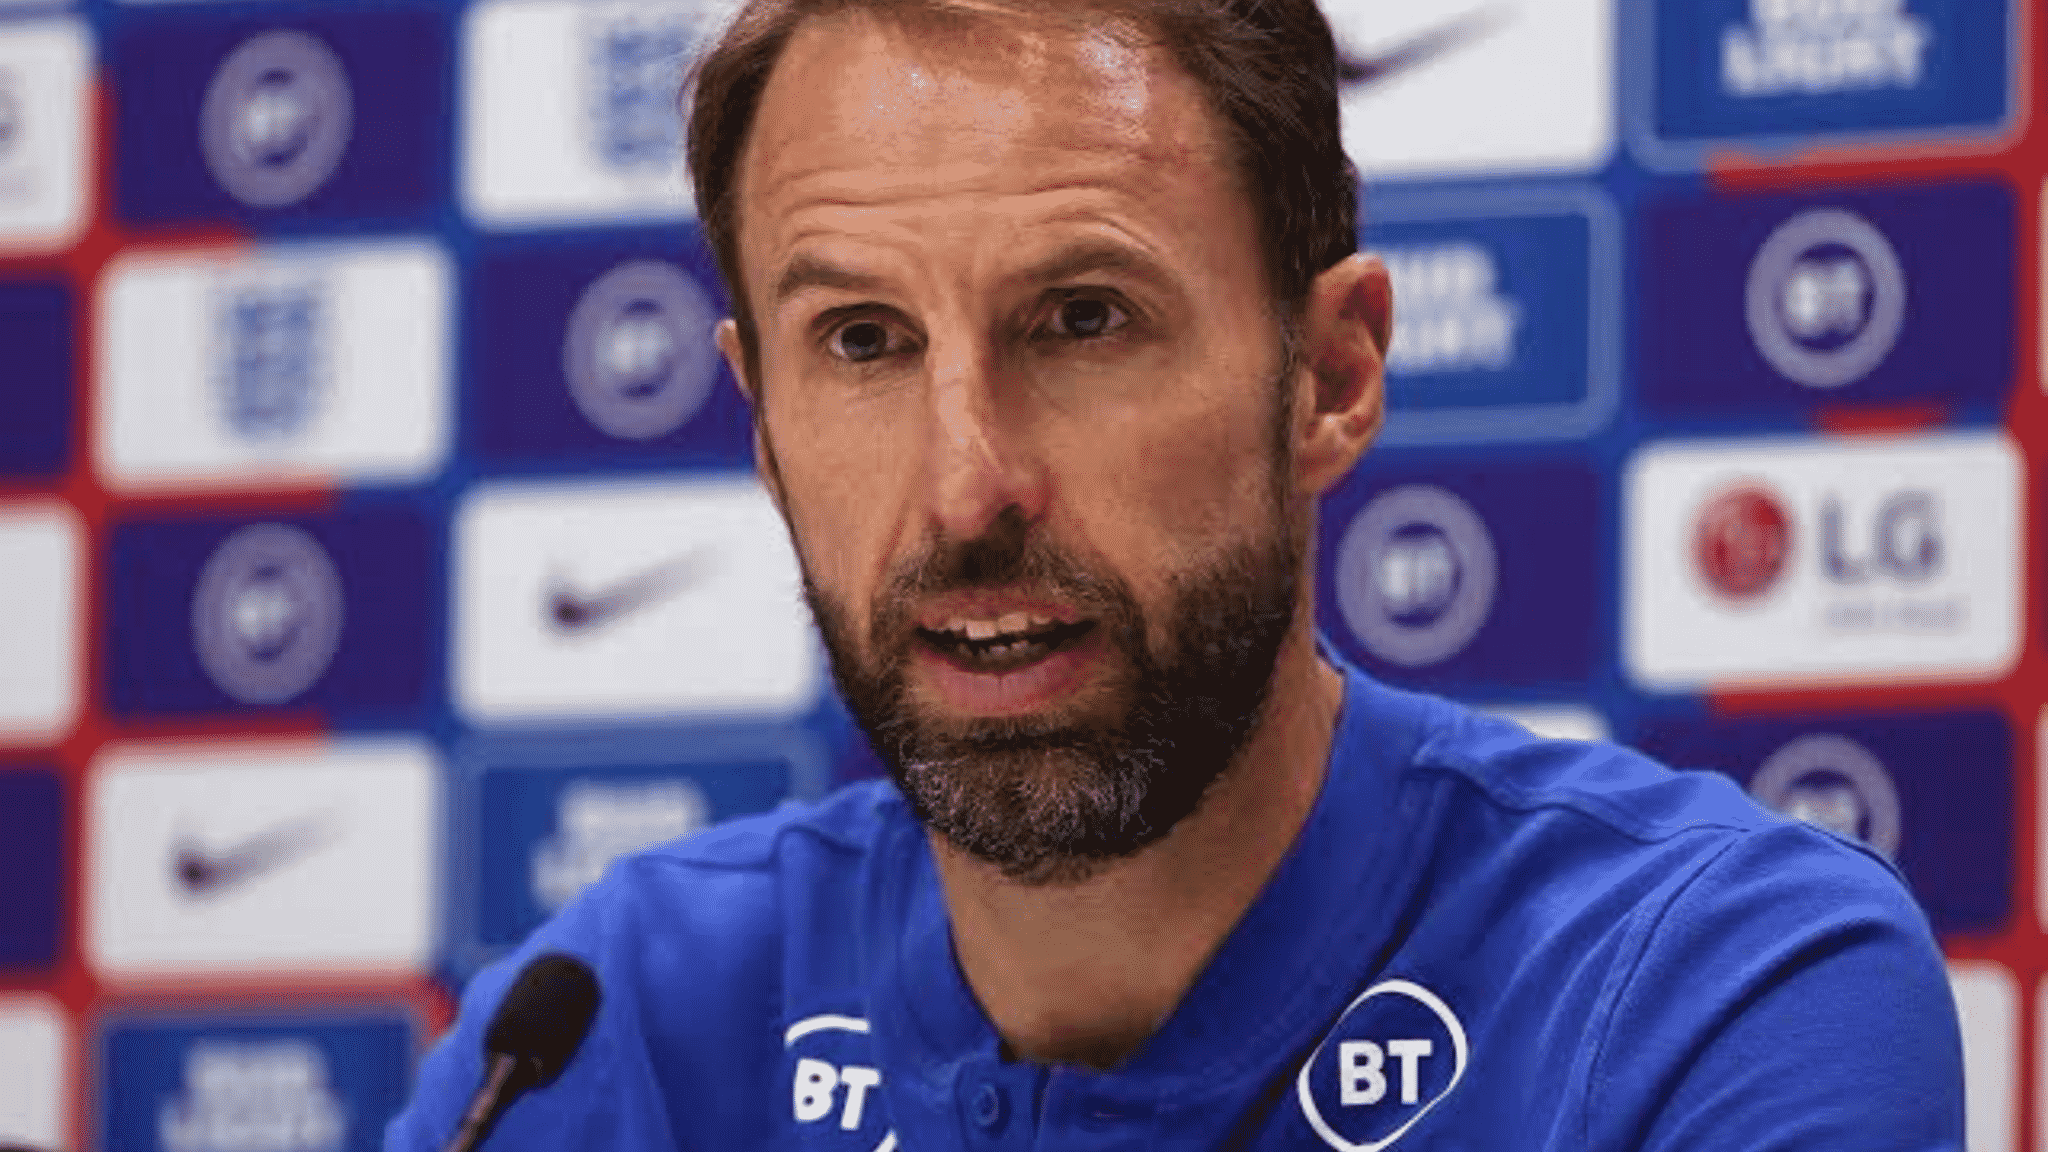 England Will Not Boycott Qatar 2022 World Cup, Southgate Says, My Football Facts